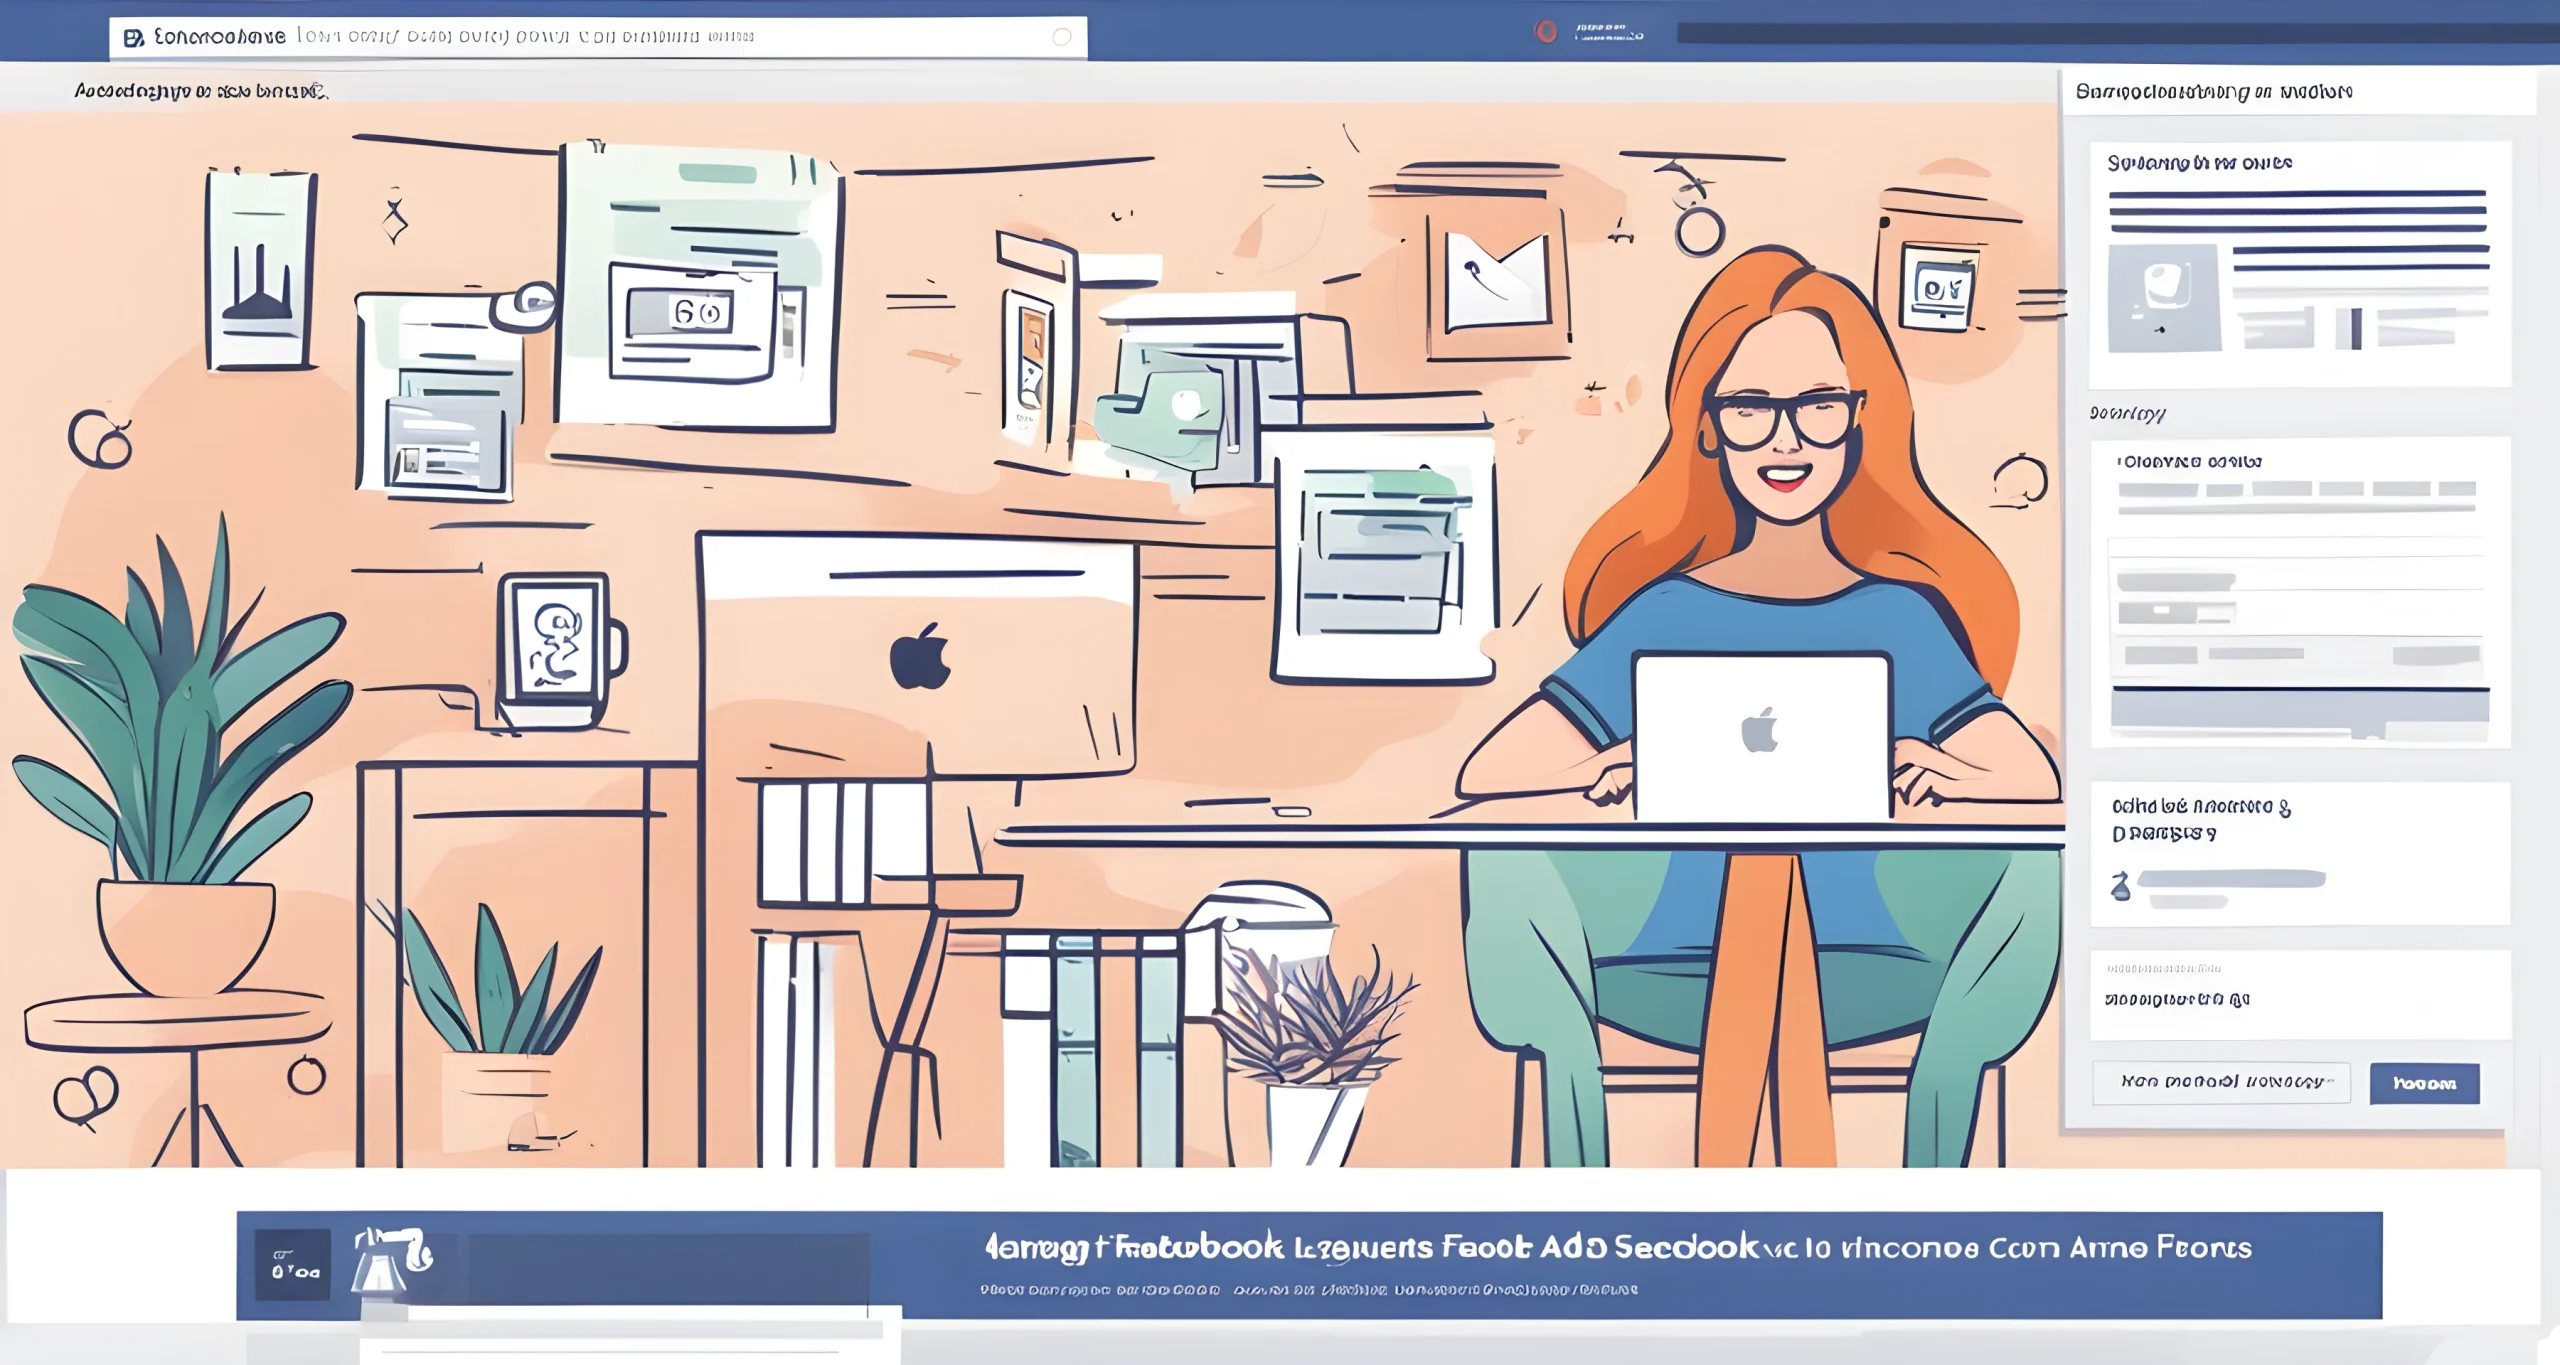 Leveraging Facebook Ads to Boost Your Income